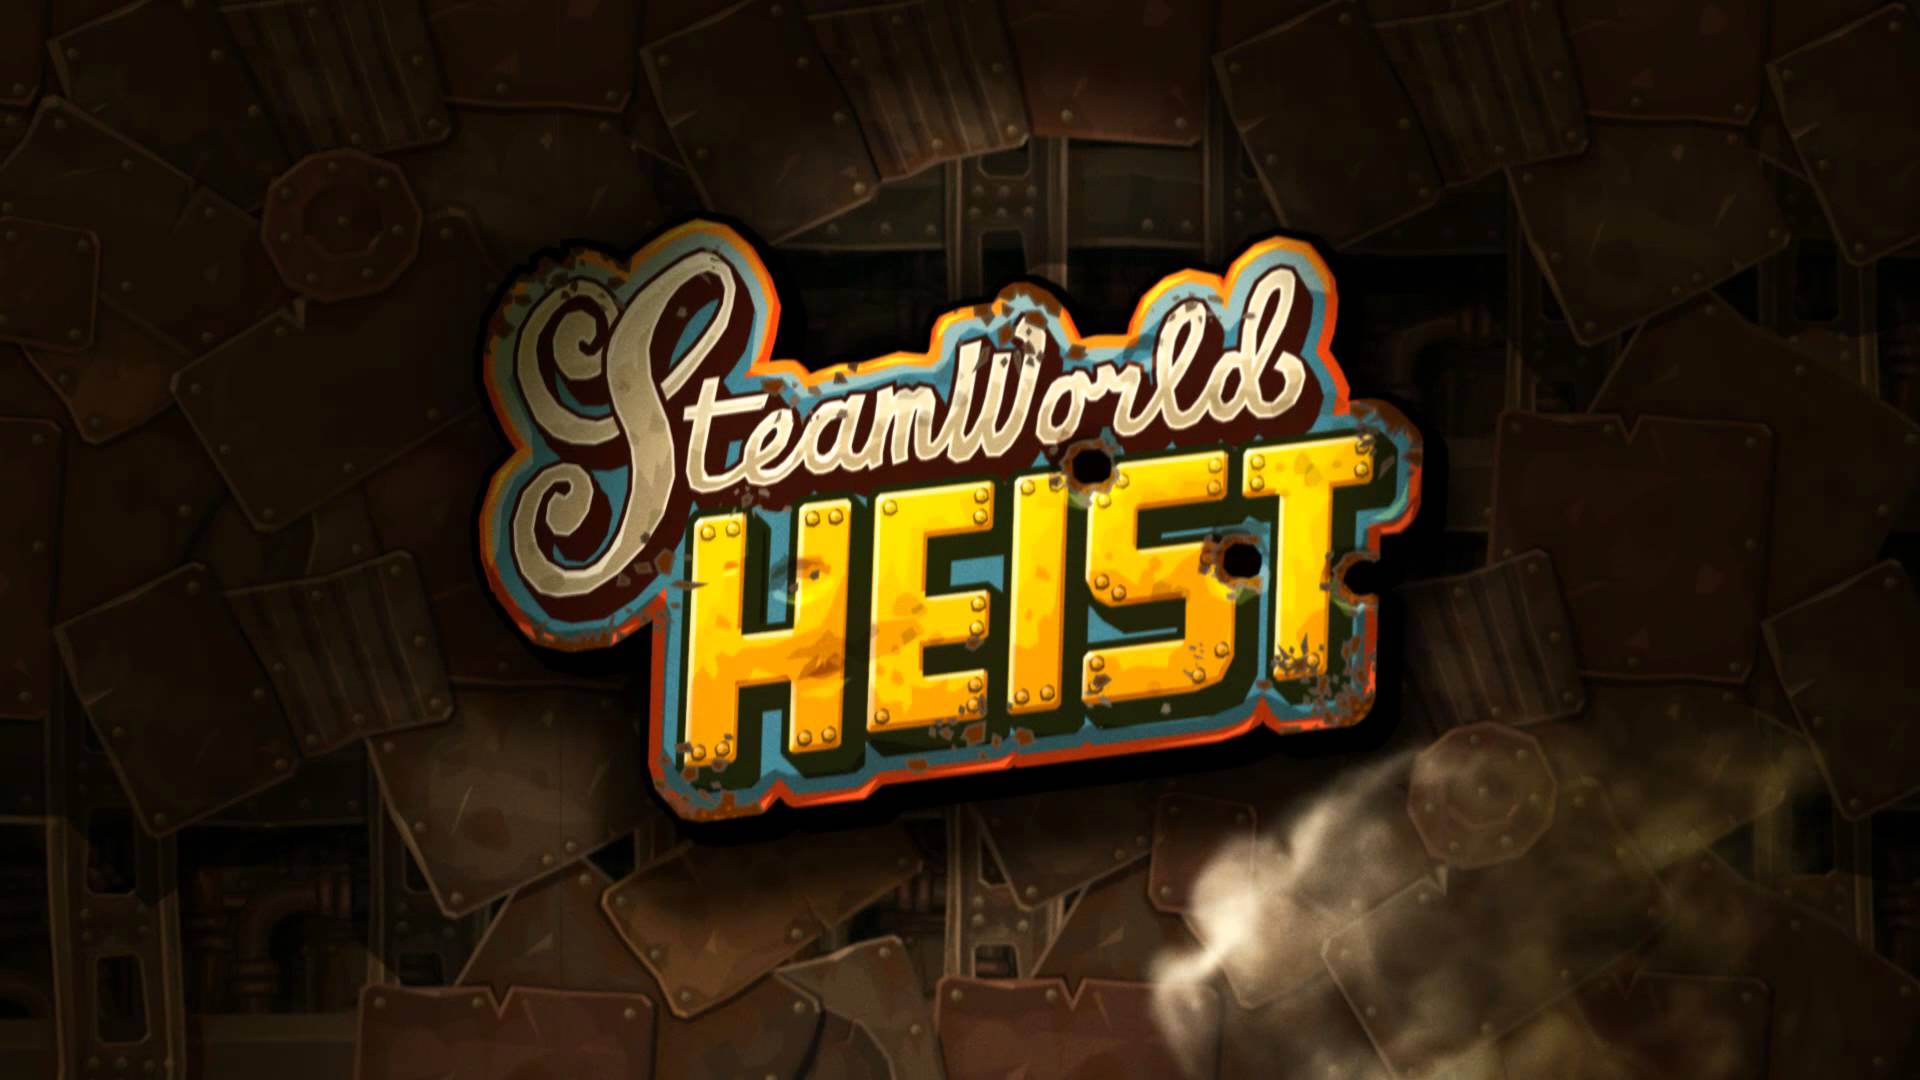 HD Quality Wallpaper | Collection: Video Game, 1920x1080 SteamWorld Heist